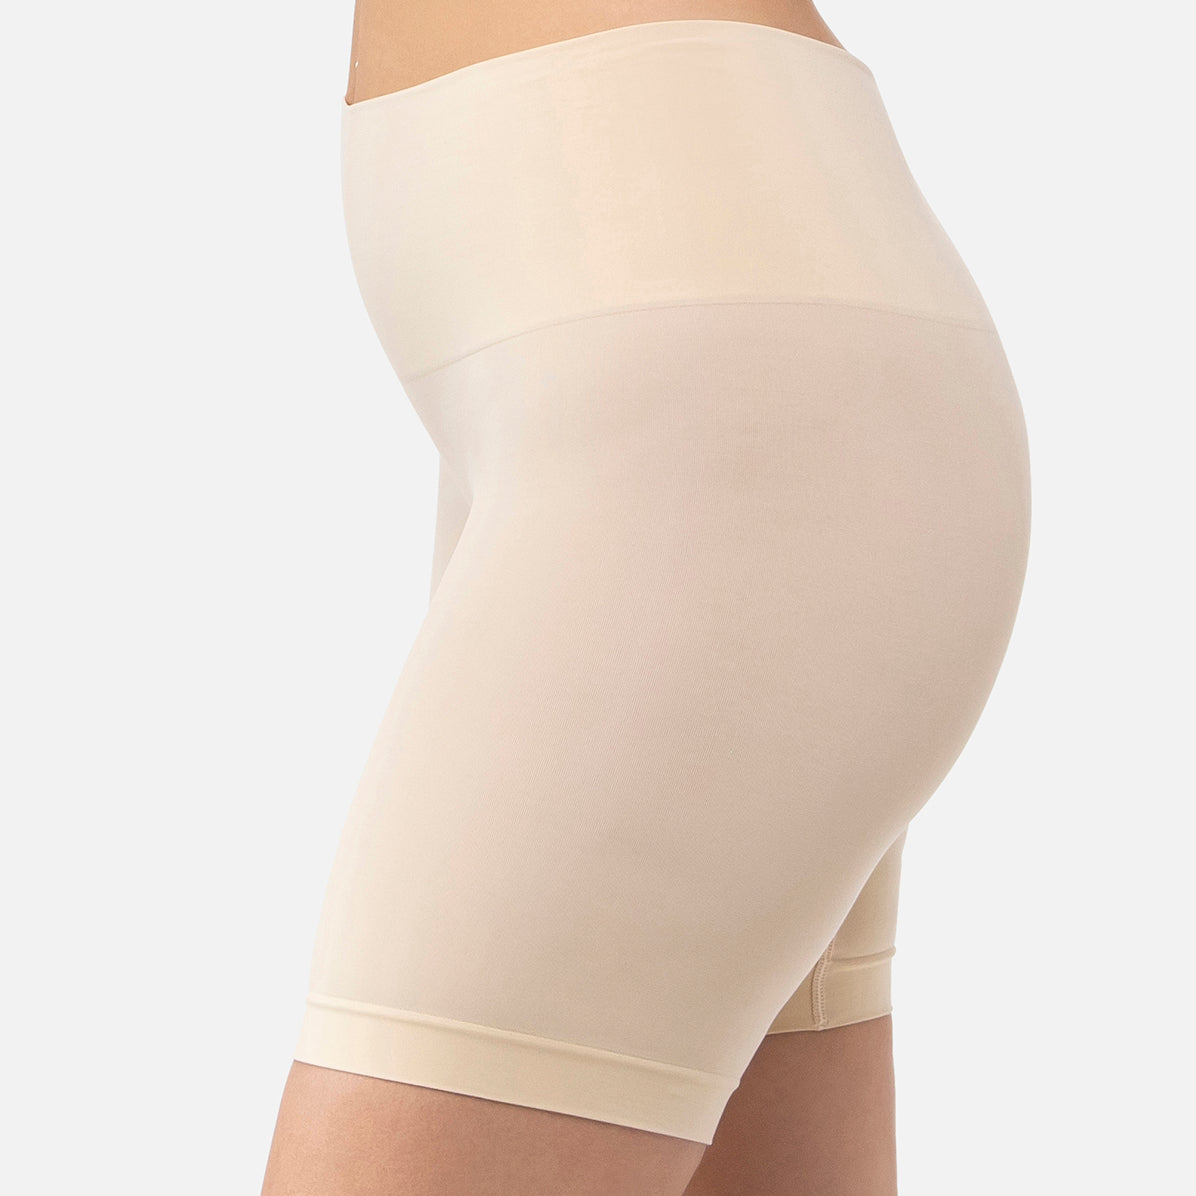 Dual Function Thigh Protectors 7"